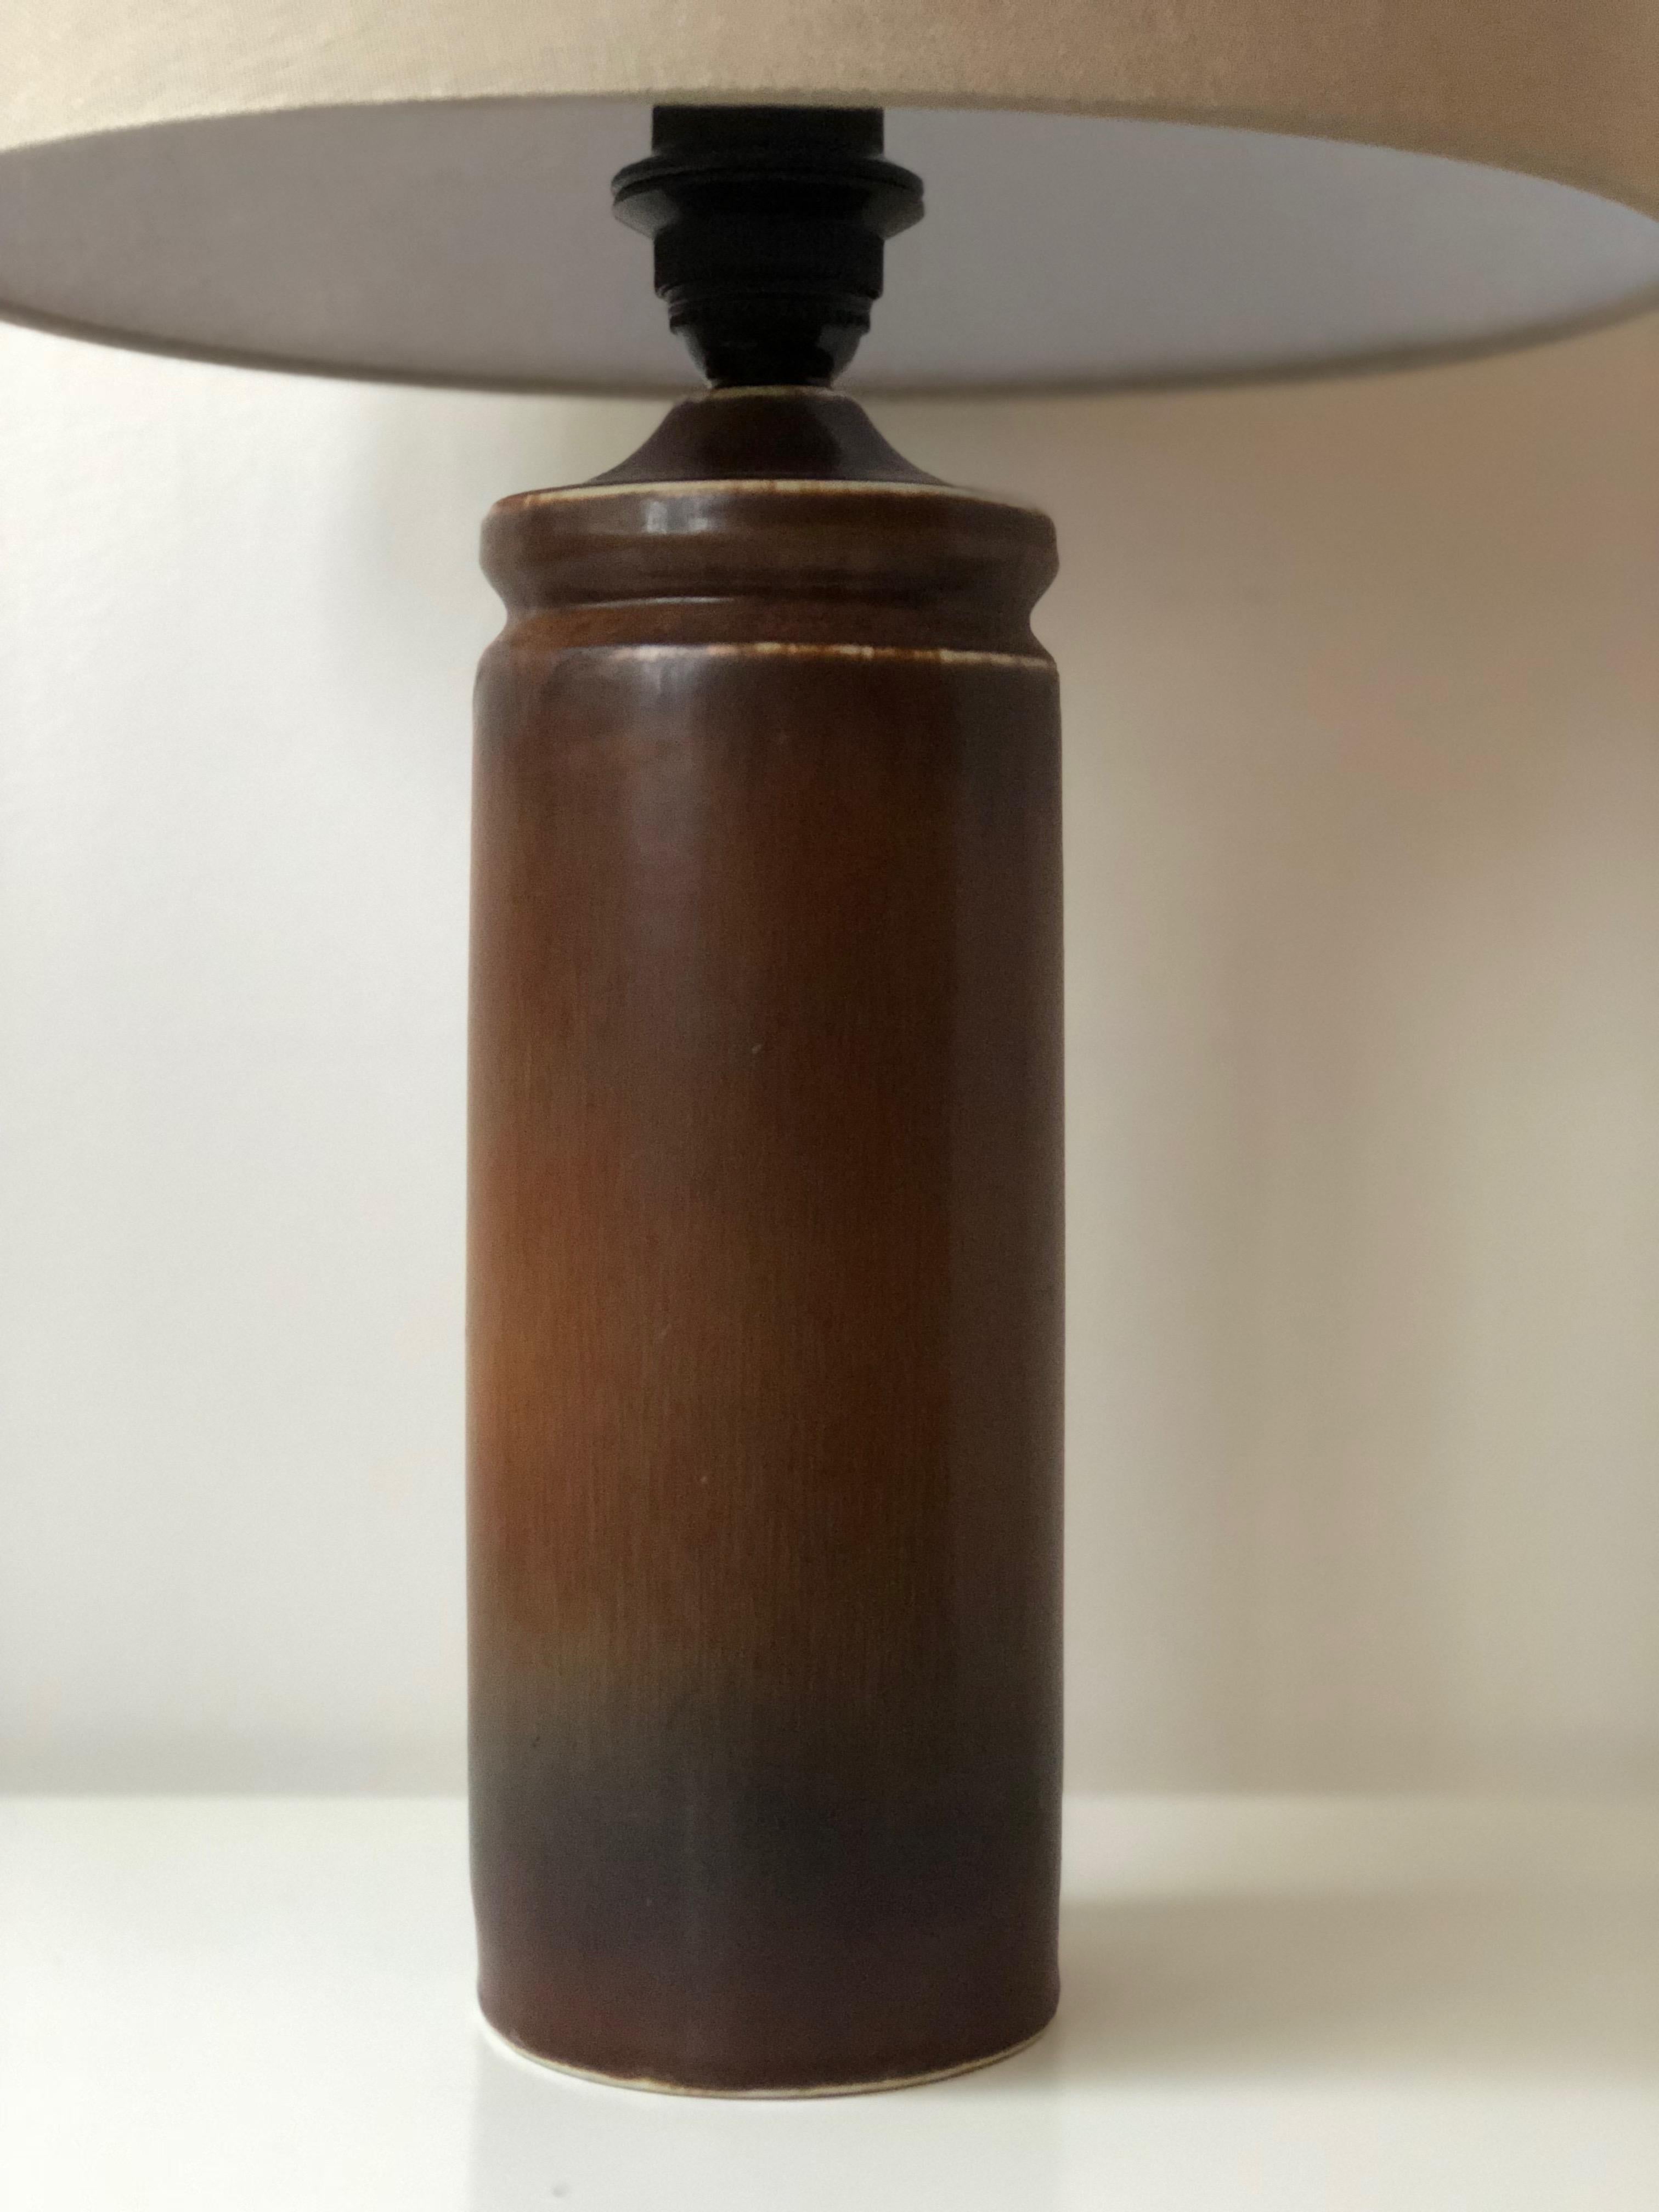 Swedish modern, column shaped, brown, glazed stoneware lamp. Design by Swedish ceramist and designer Carl-Harry Stålhane for Rörstrand, Sweden.
1950s.
The Mid-Century Modern Table lamp is marked on the bottom with the Rörstrand cipher (R with three